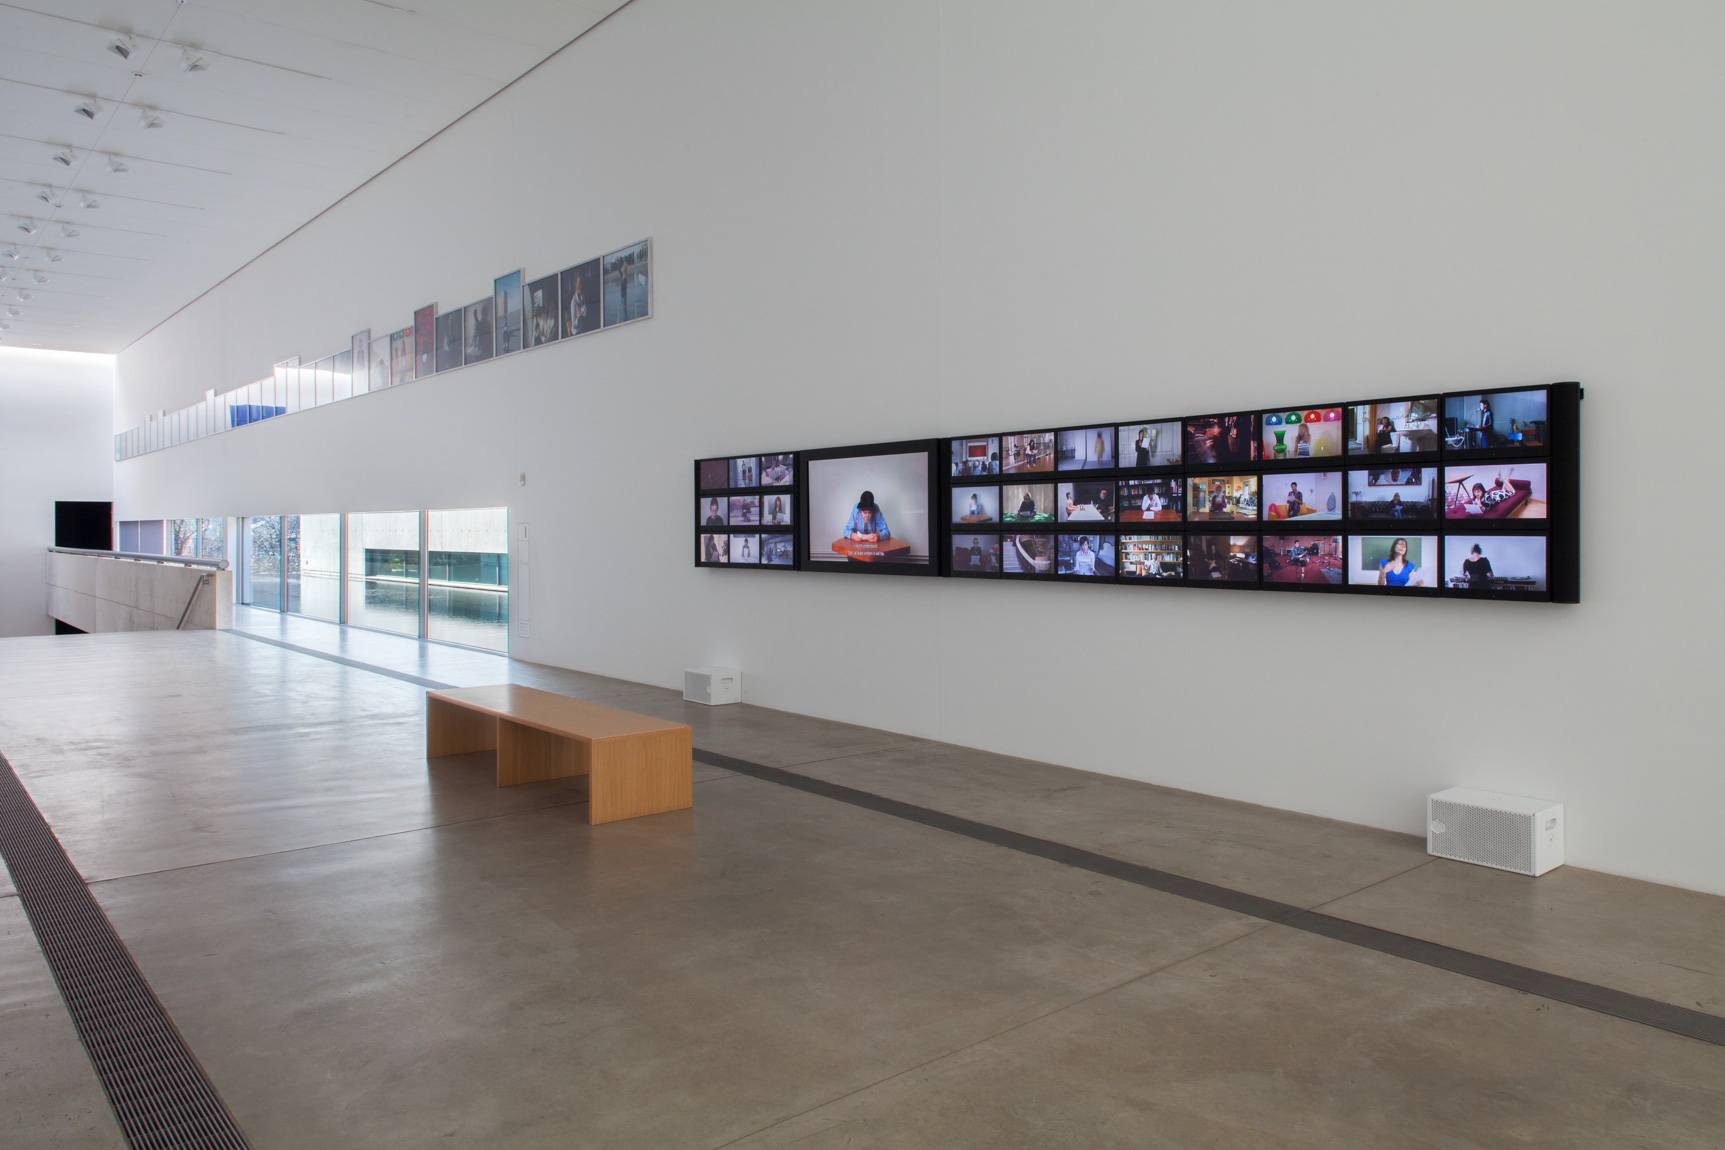 A gallery view of Calle's "Take Care of Yourself" on a large, narrow screen in the Main Gallery.